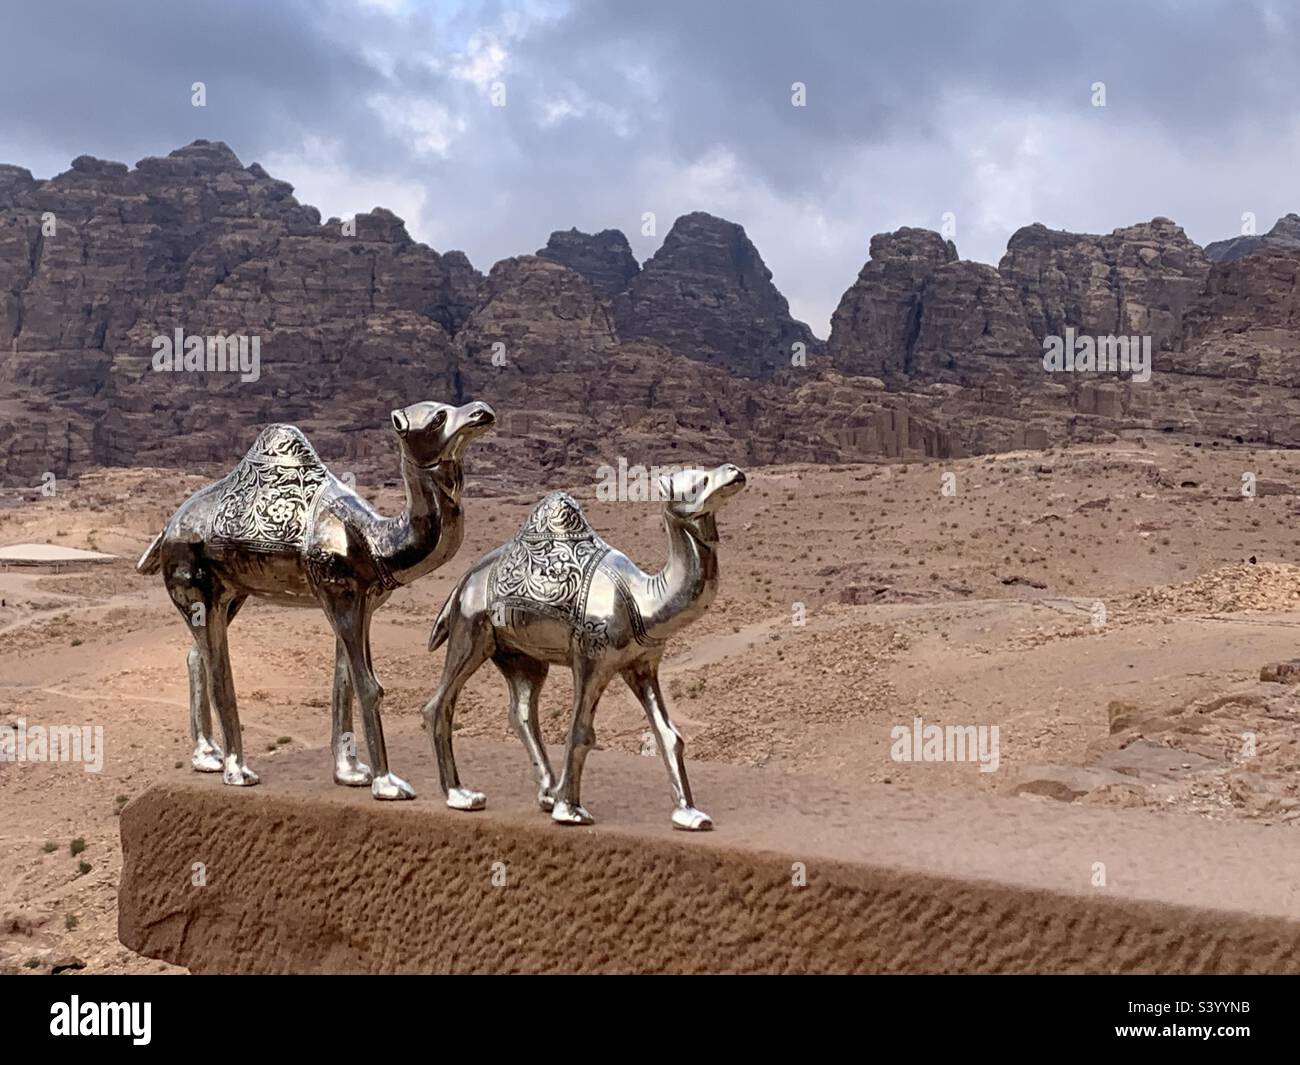 Silver camels with mountains in the background Stock Photo